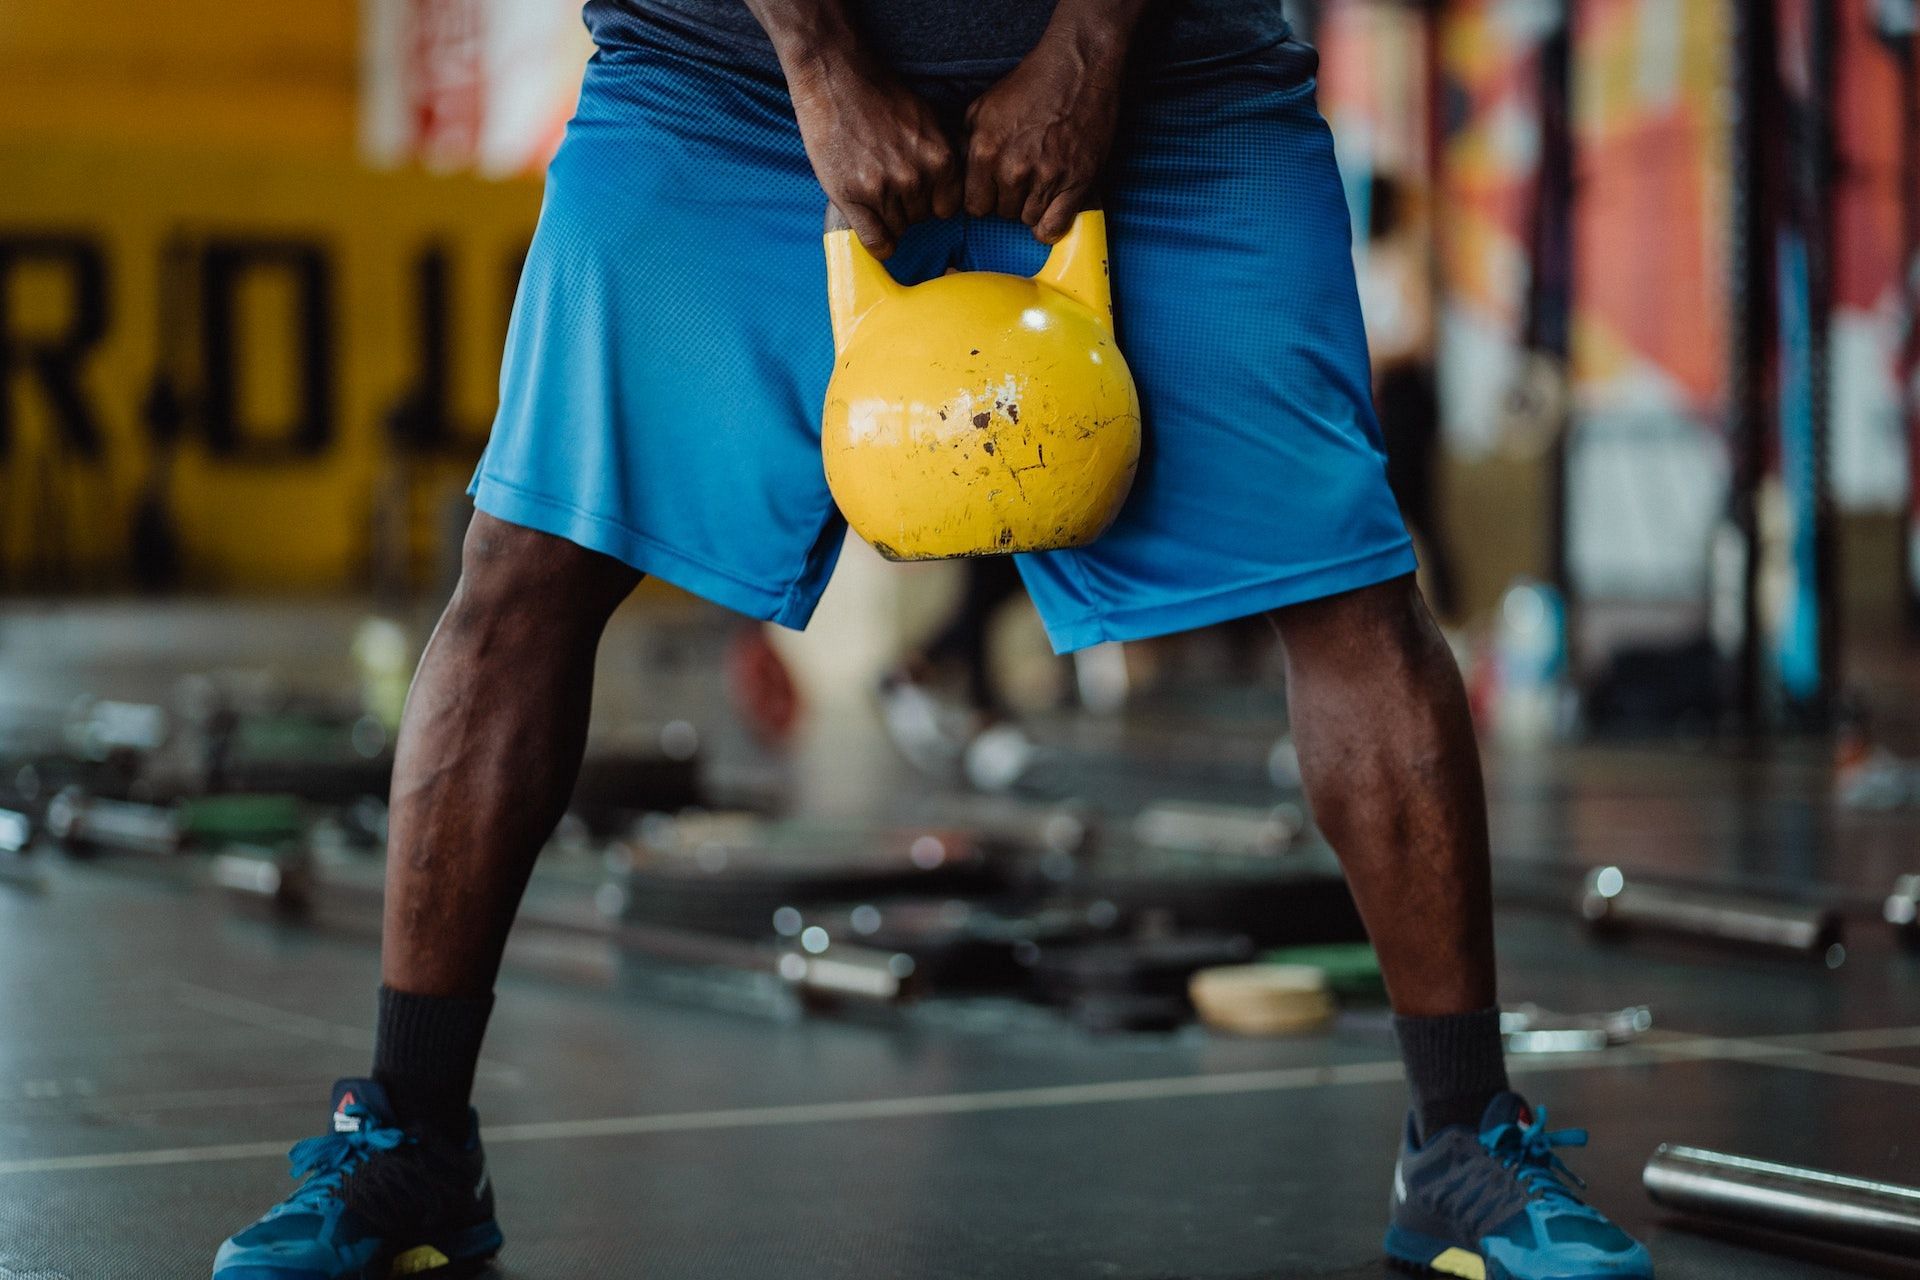 The single-leg kettlebell deadlift is great for people with balance issues. (Photo via Pexels/Ketut Subiyanto)